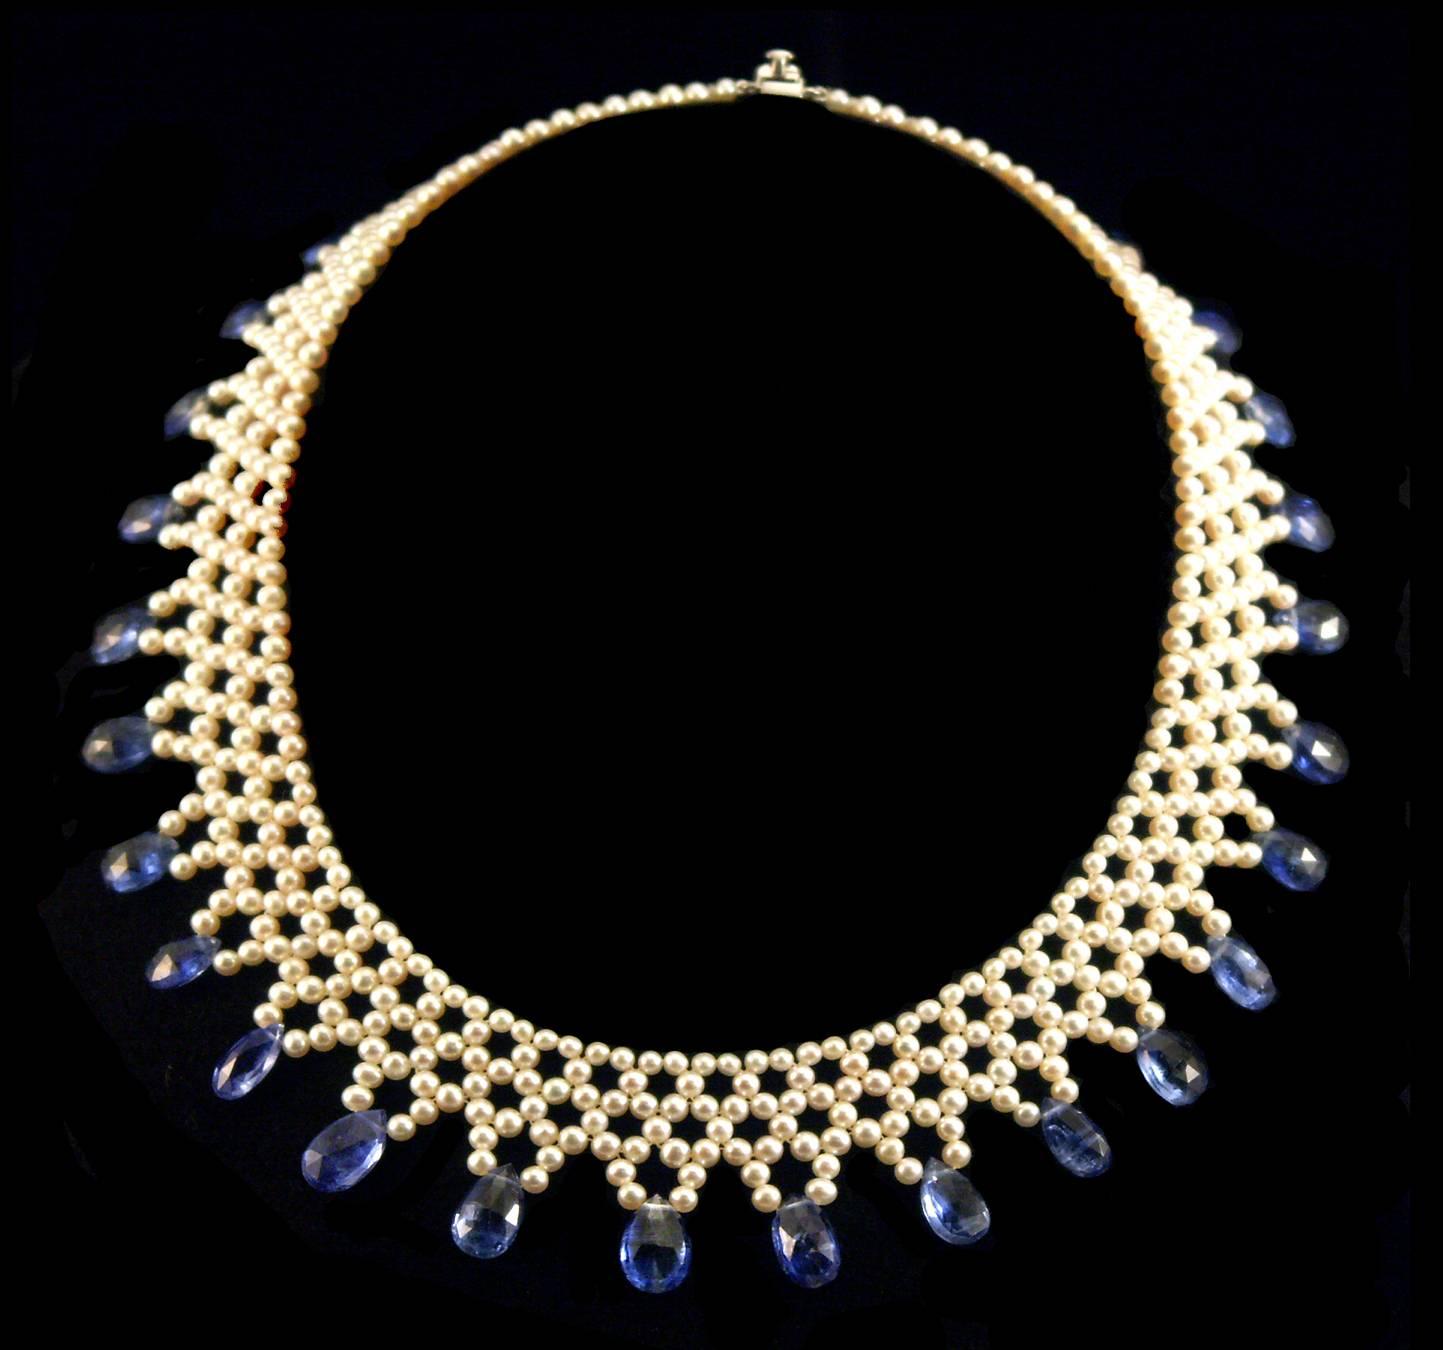 Contemporary Marina J. Woven Pearl Necklace with Kyanite Briolets and 14 Karat Gold Clasp For Sale